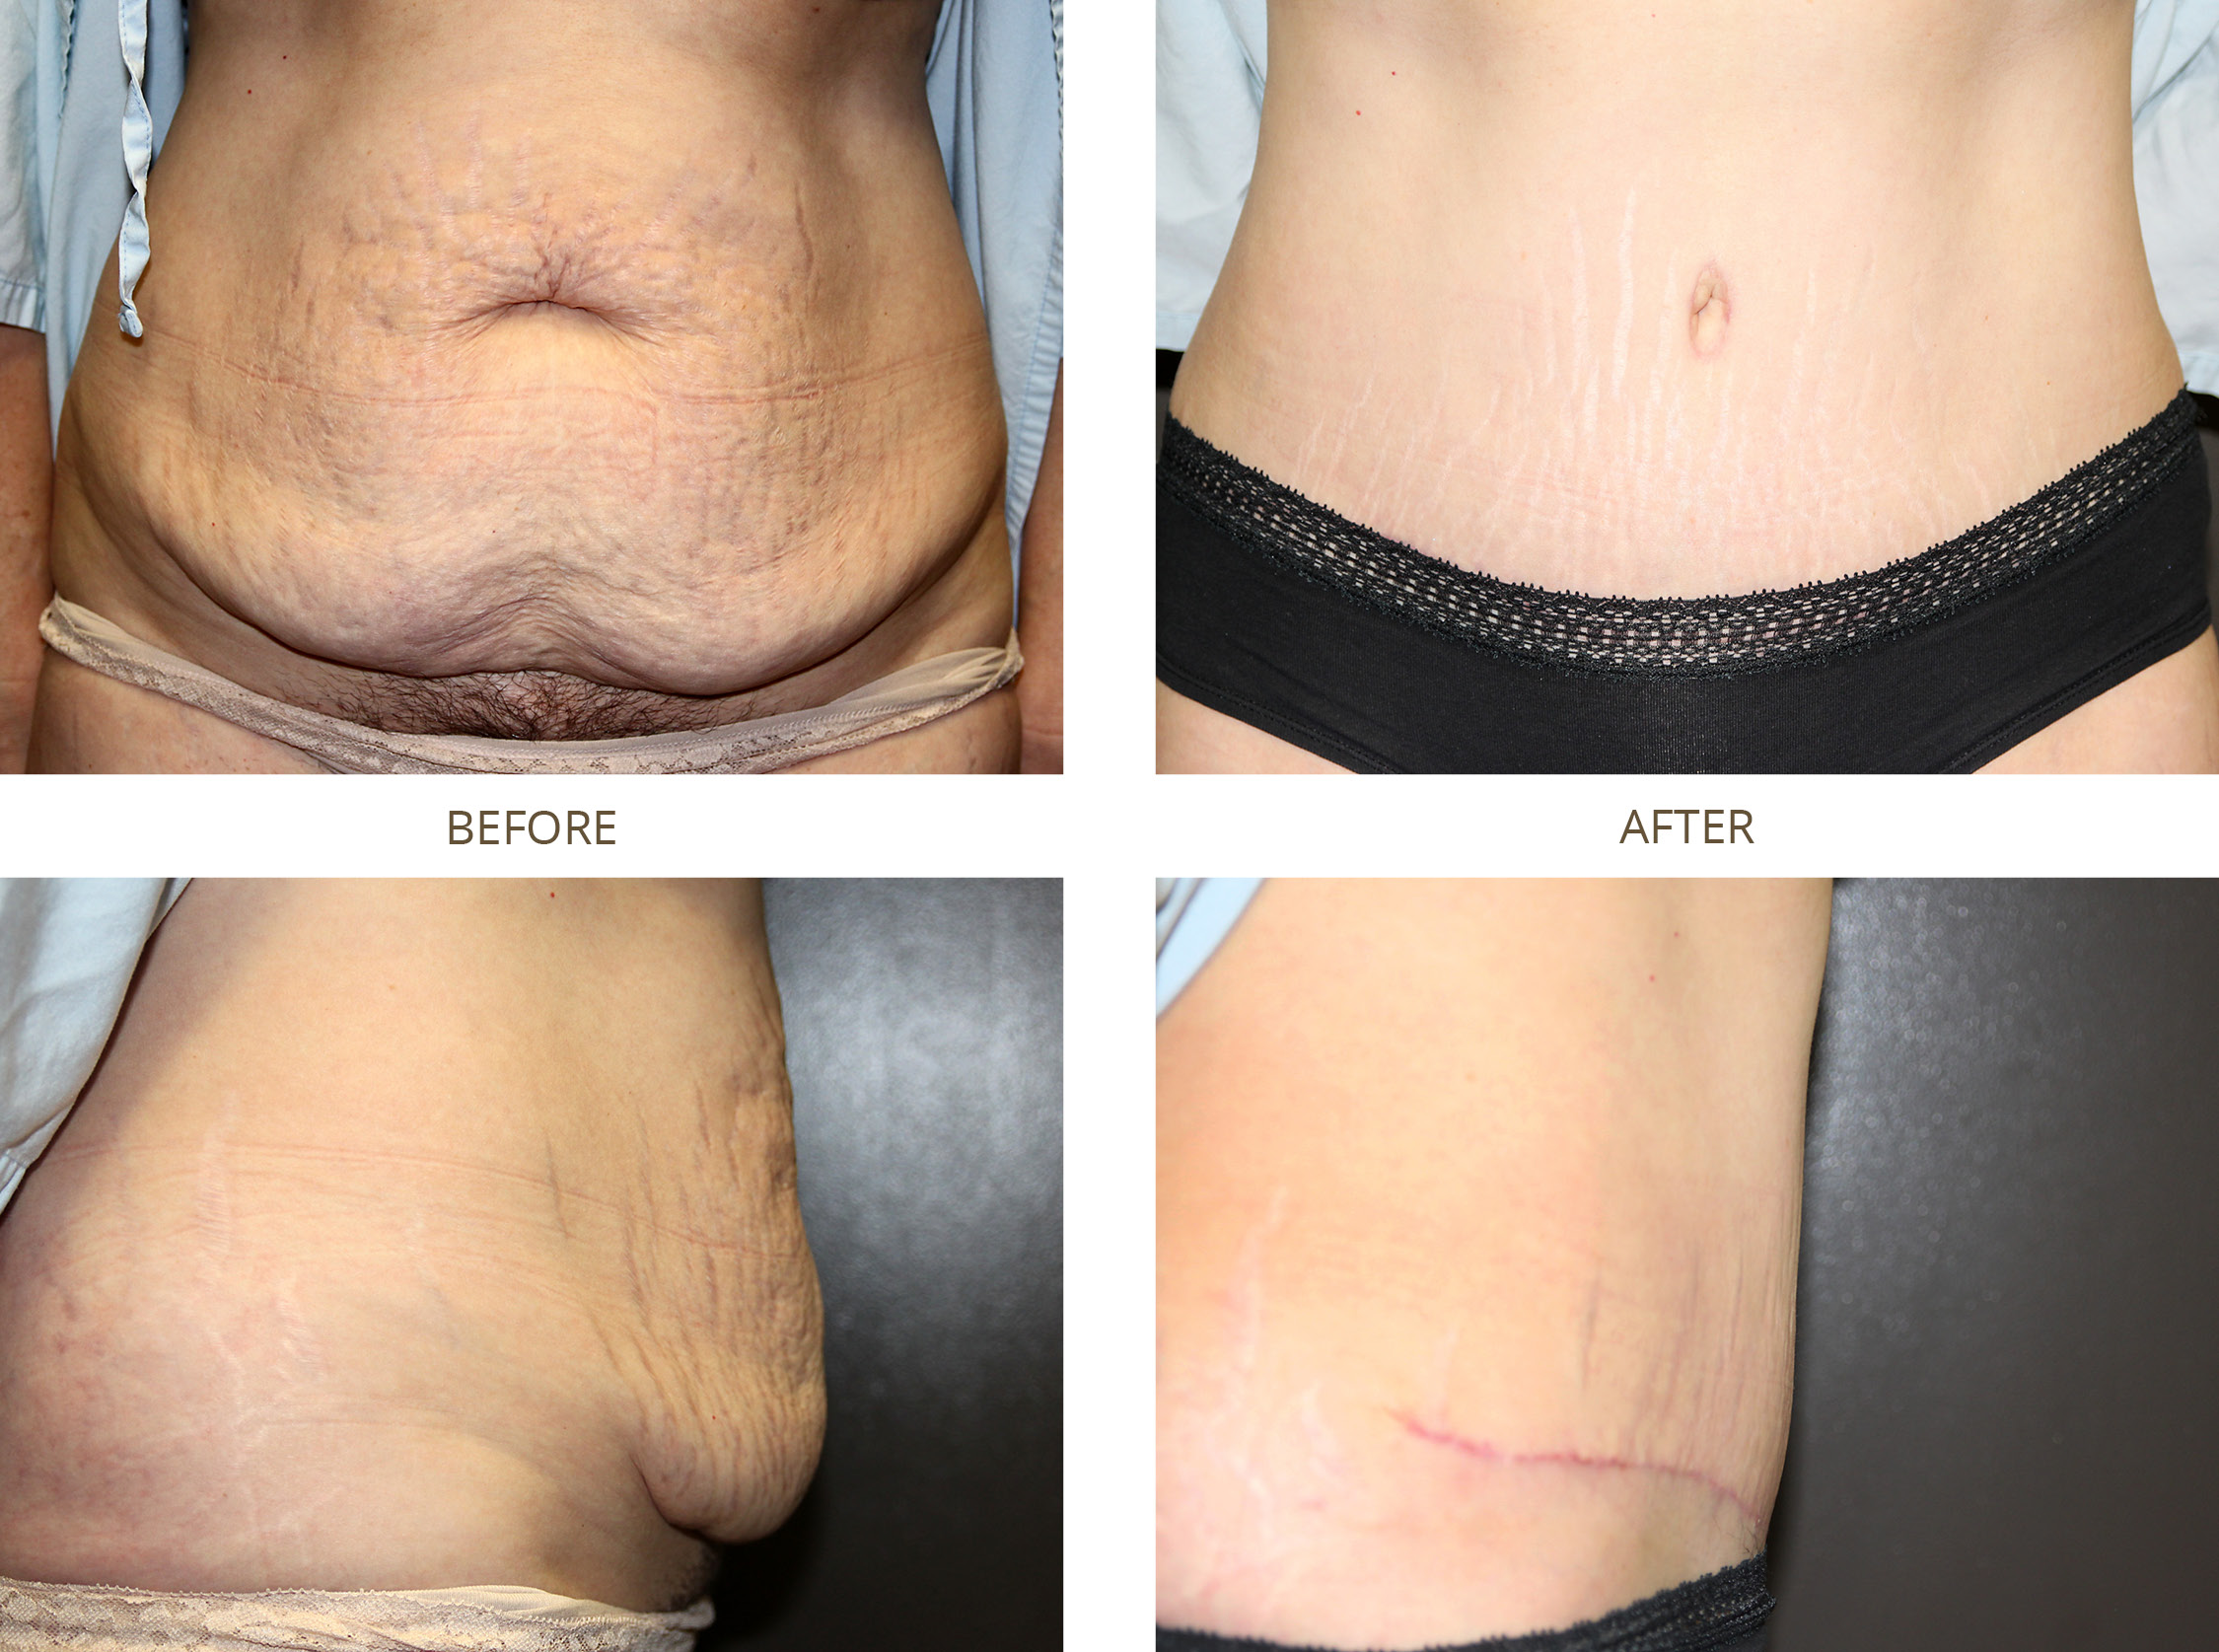 Before and After Gallery of Tummy Tuck.